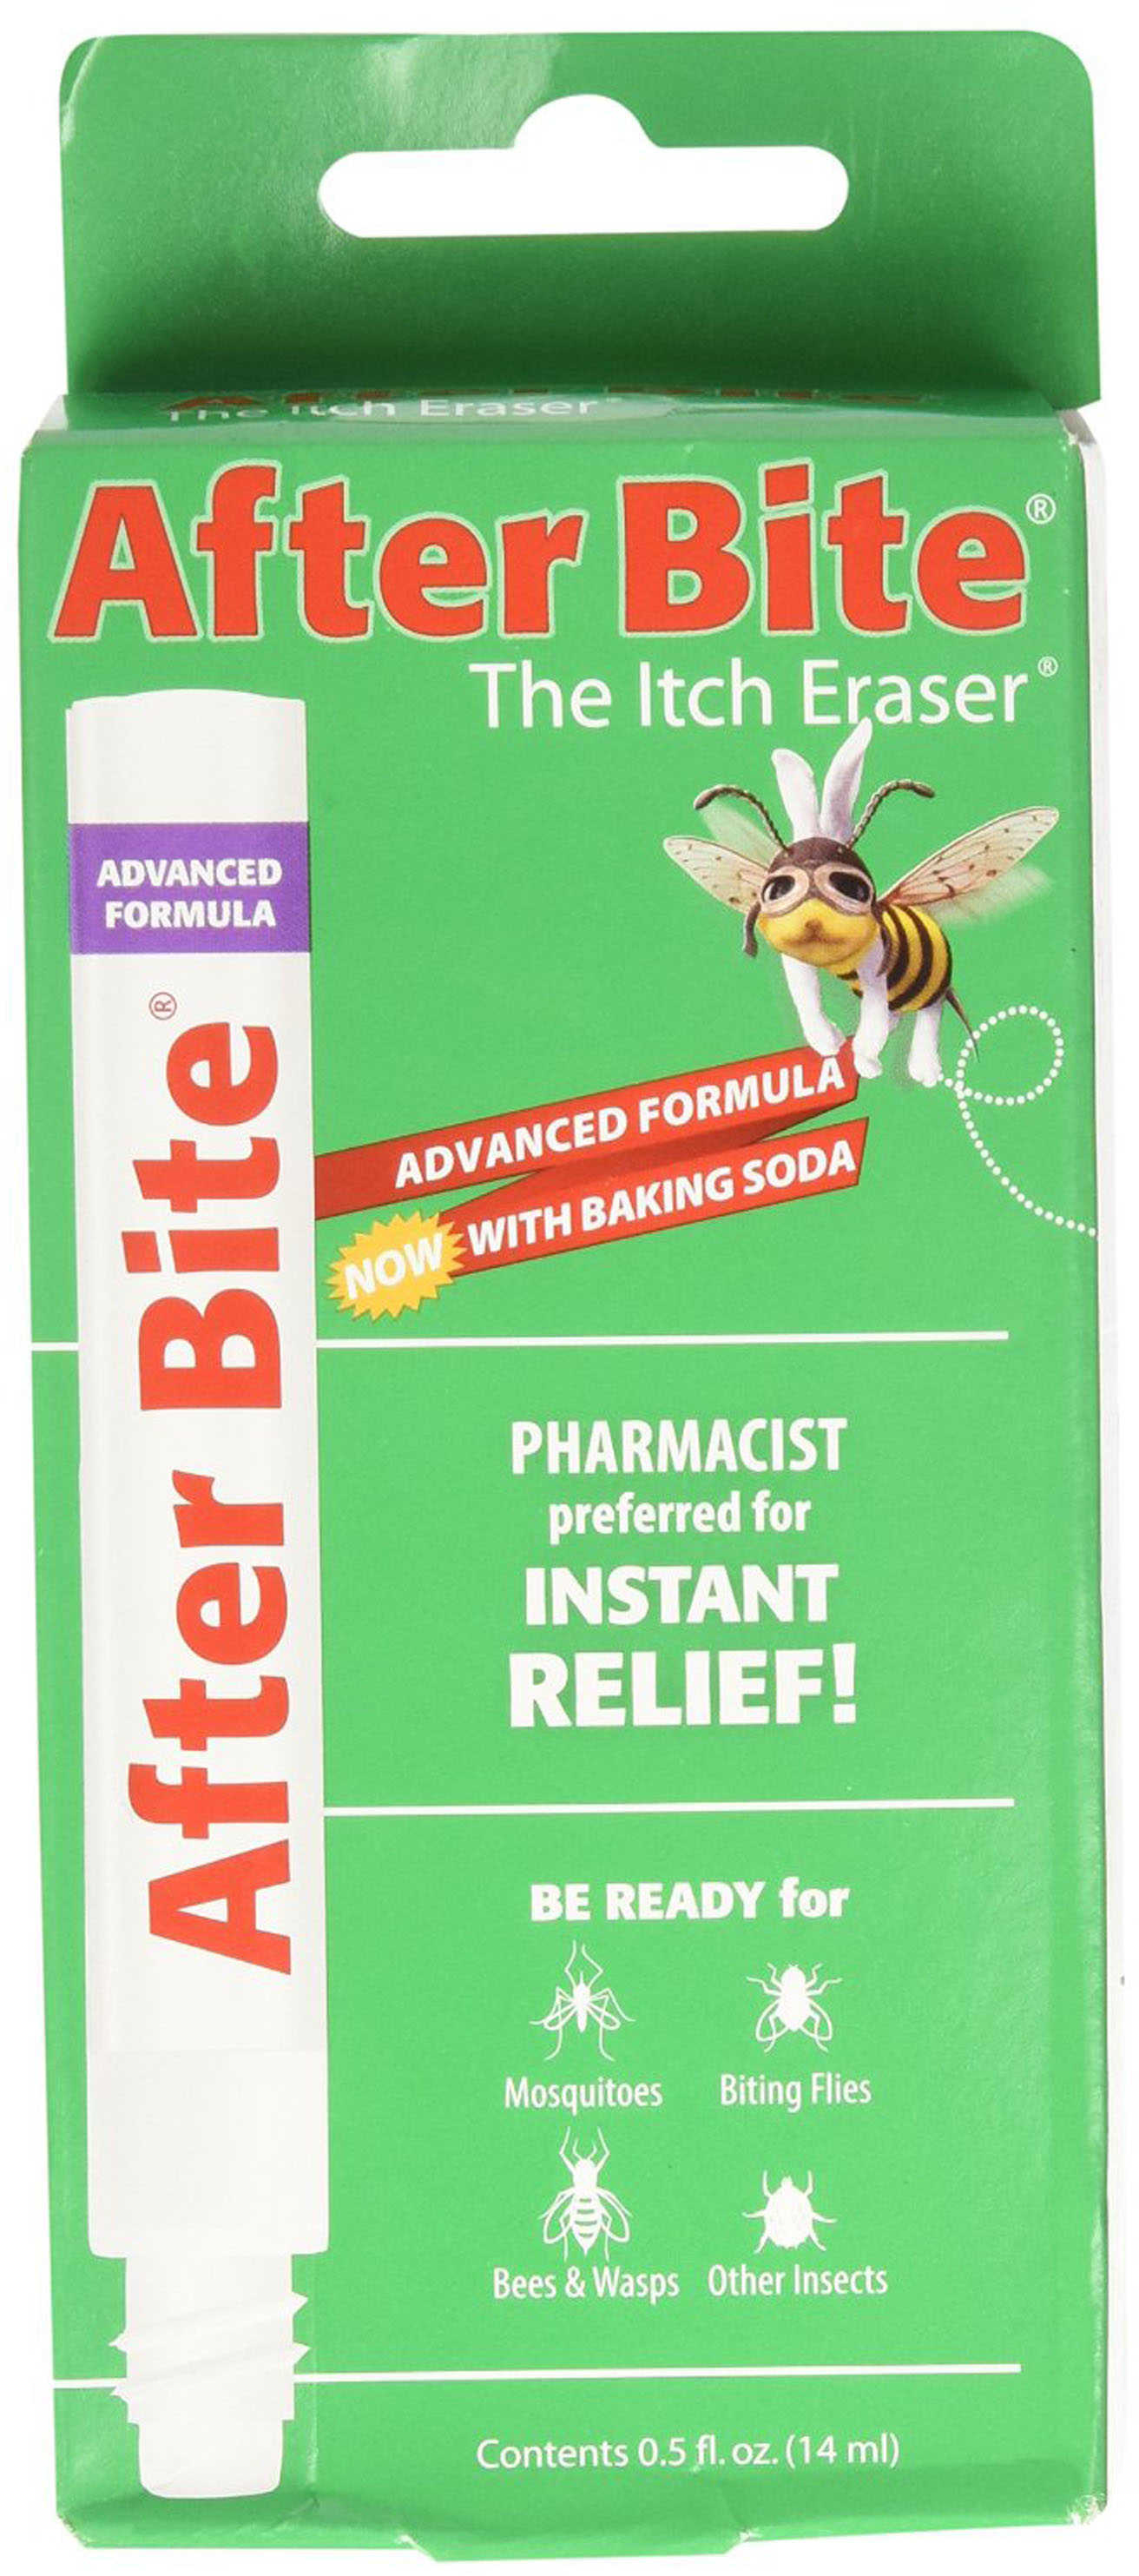 After Bite The Itch Eraser For Insect Bites 0.5 Fl Oz.